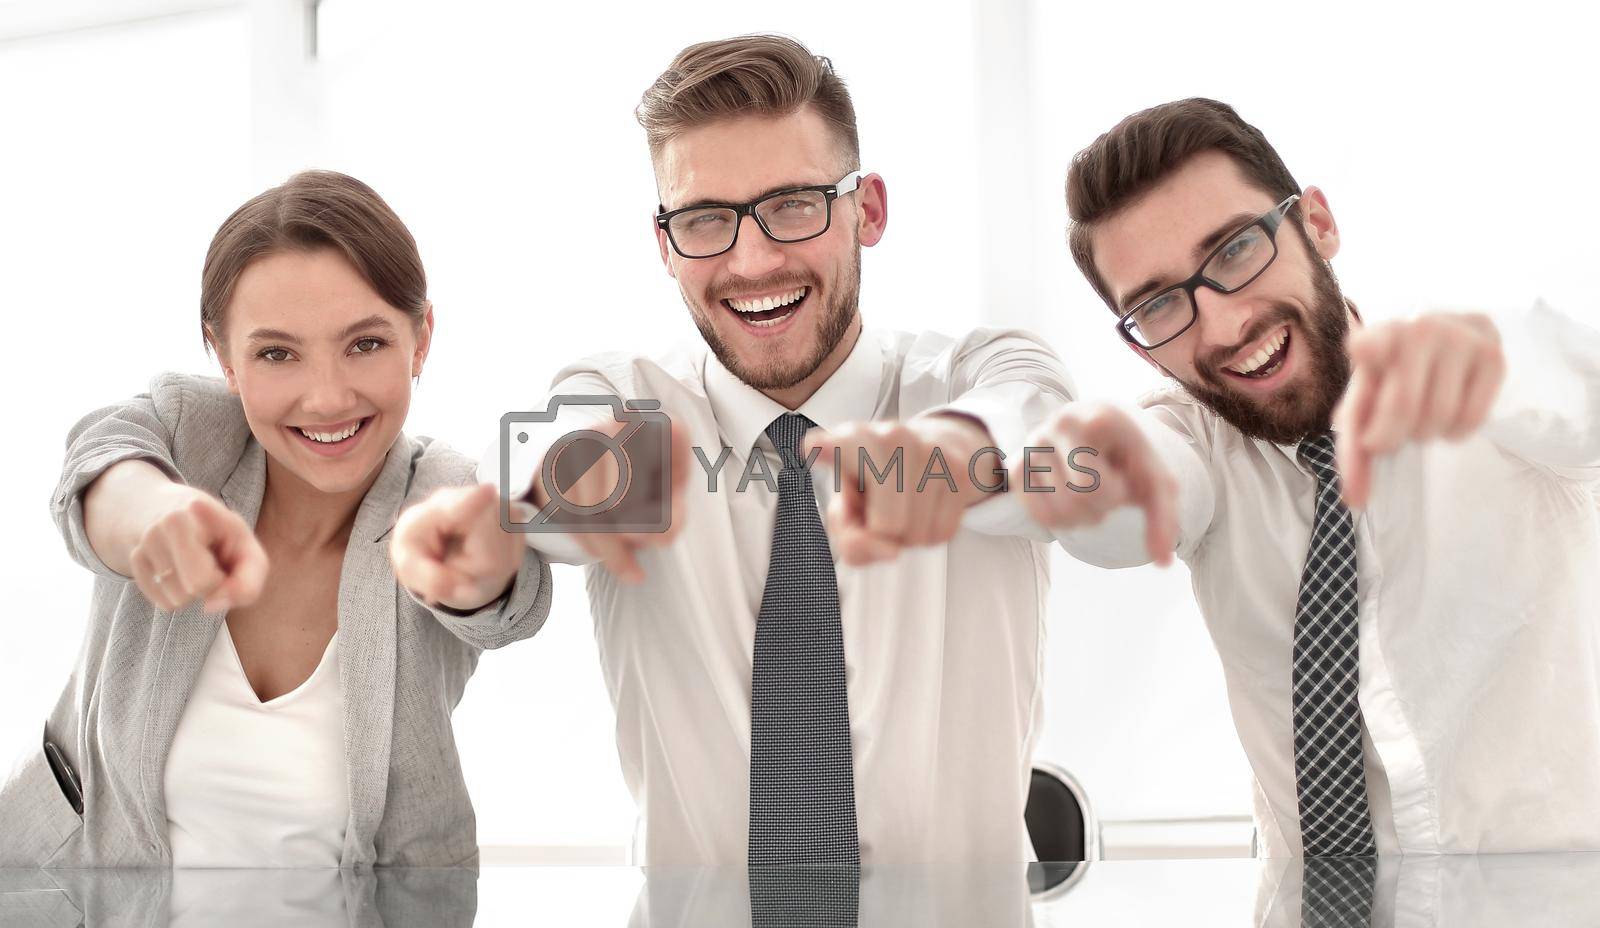 Royalty free image of group of successful young men pointing at you by asdf